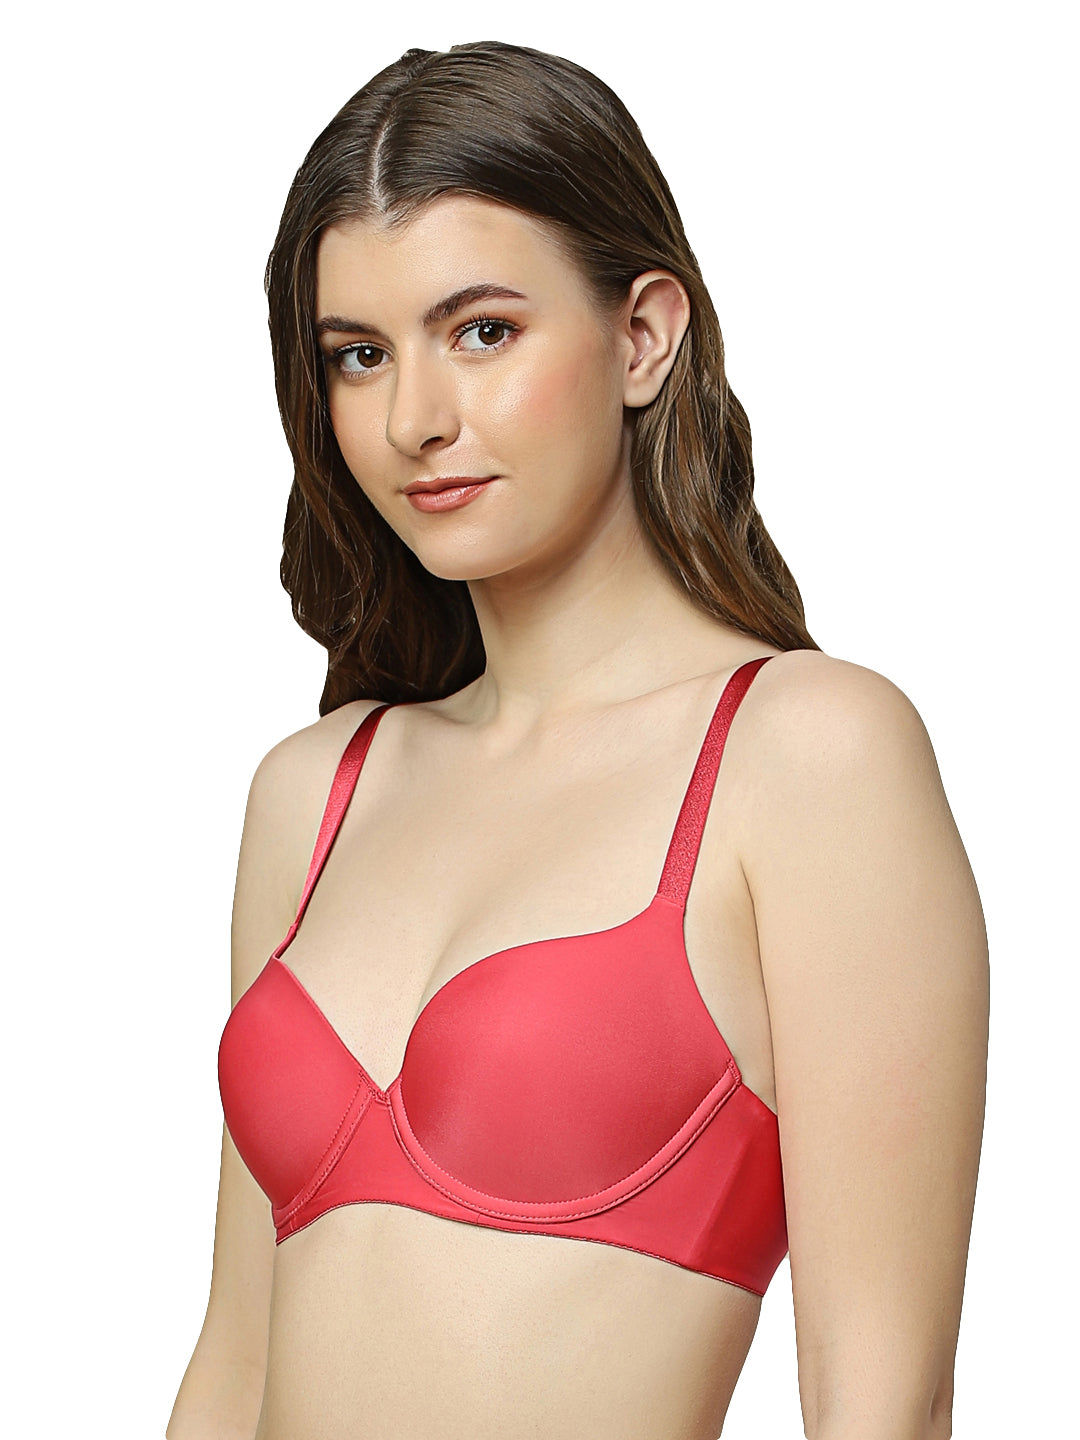 TRIUMPH-122I087 T-Shirt Bra 60 Invisible Wired Padded Body Make-Up Series Light Weight Seamless Support Everyday Bra